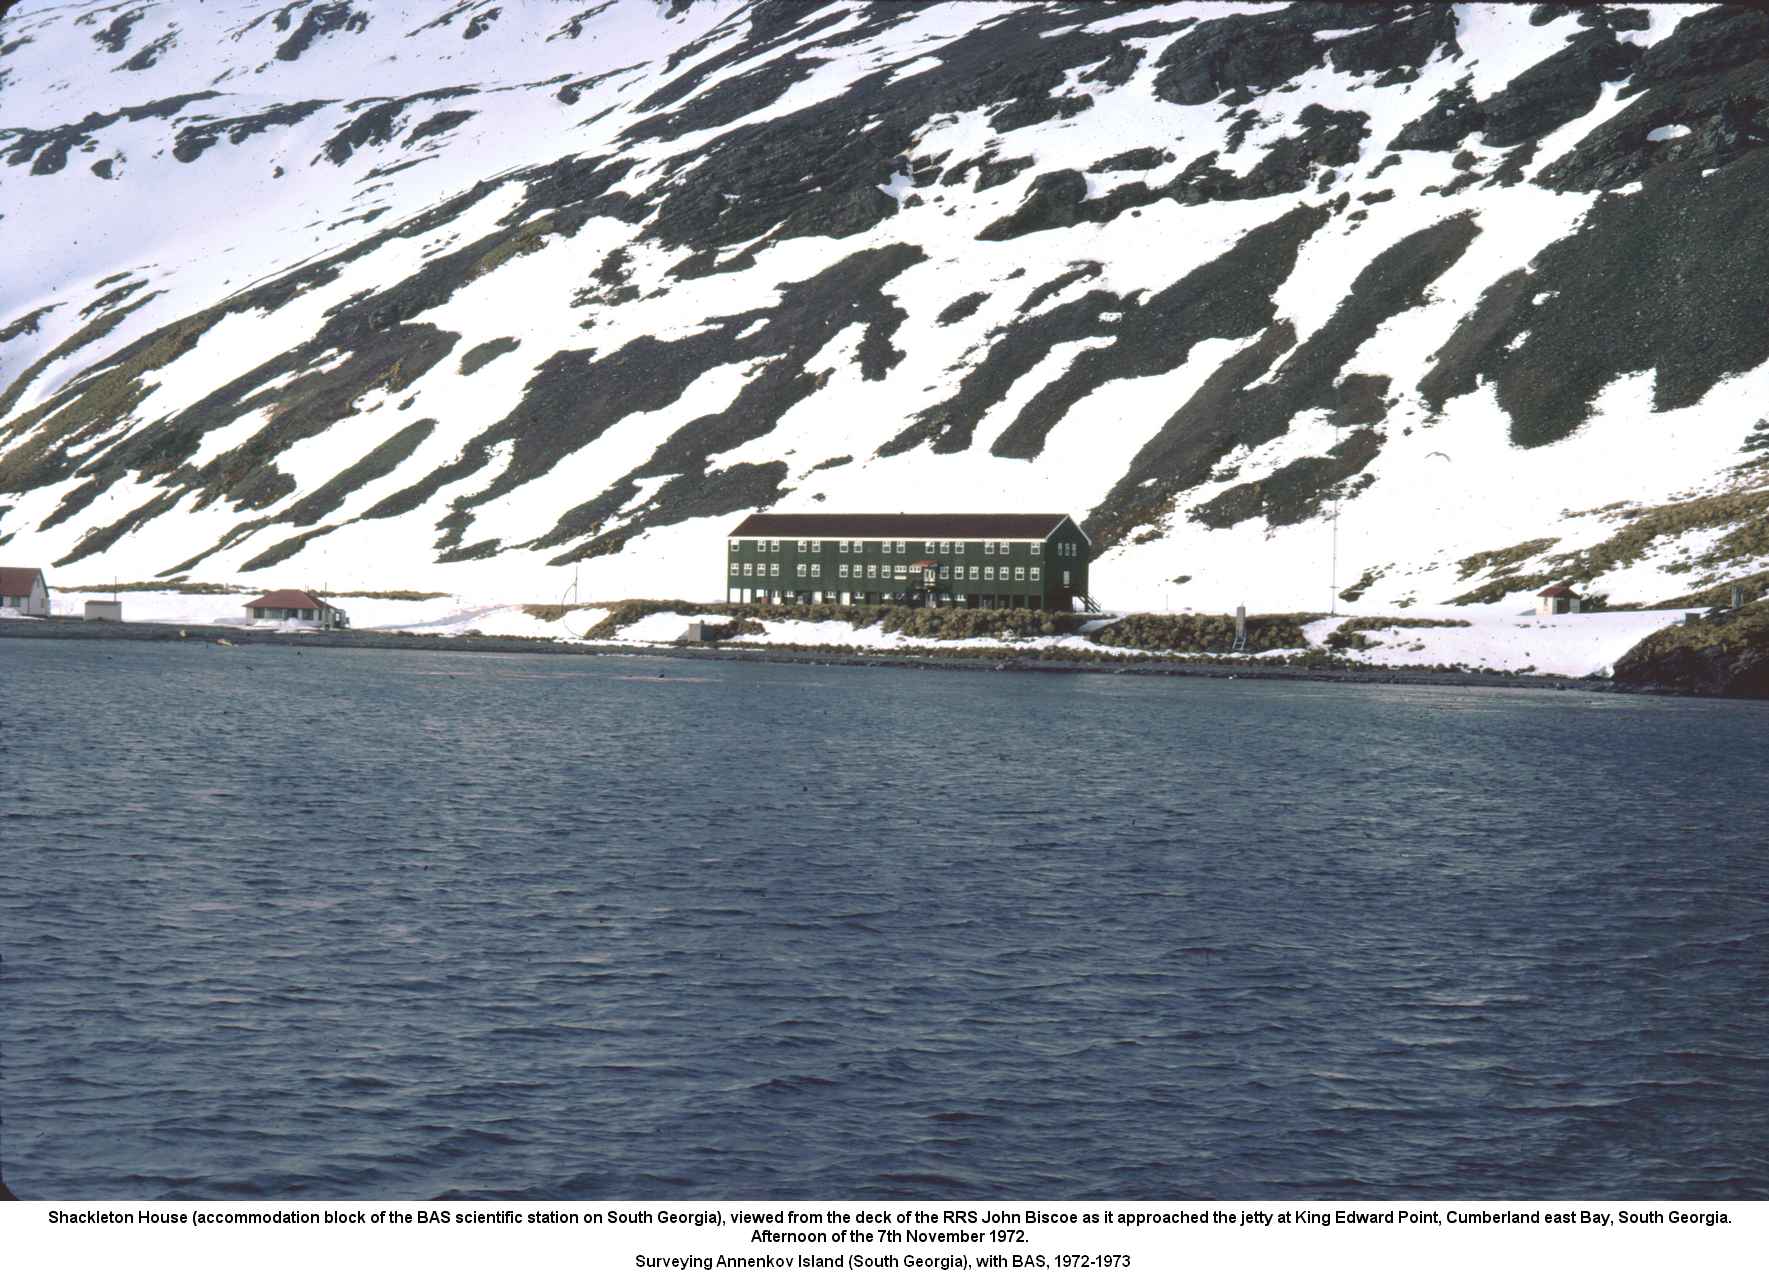 Shackleton House (accommodation block of the BAS scientific station on South Georgia), viewed from the deck of the RRS John Biscoe as it approached the jetty at King Edward Point, Cumberland east Bay, South Georgia.
Afternoon of the 7th November 1972.